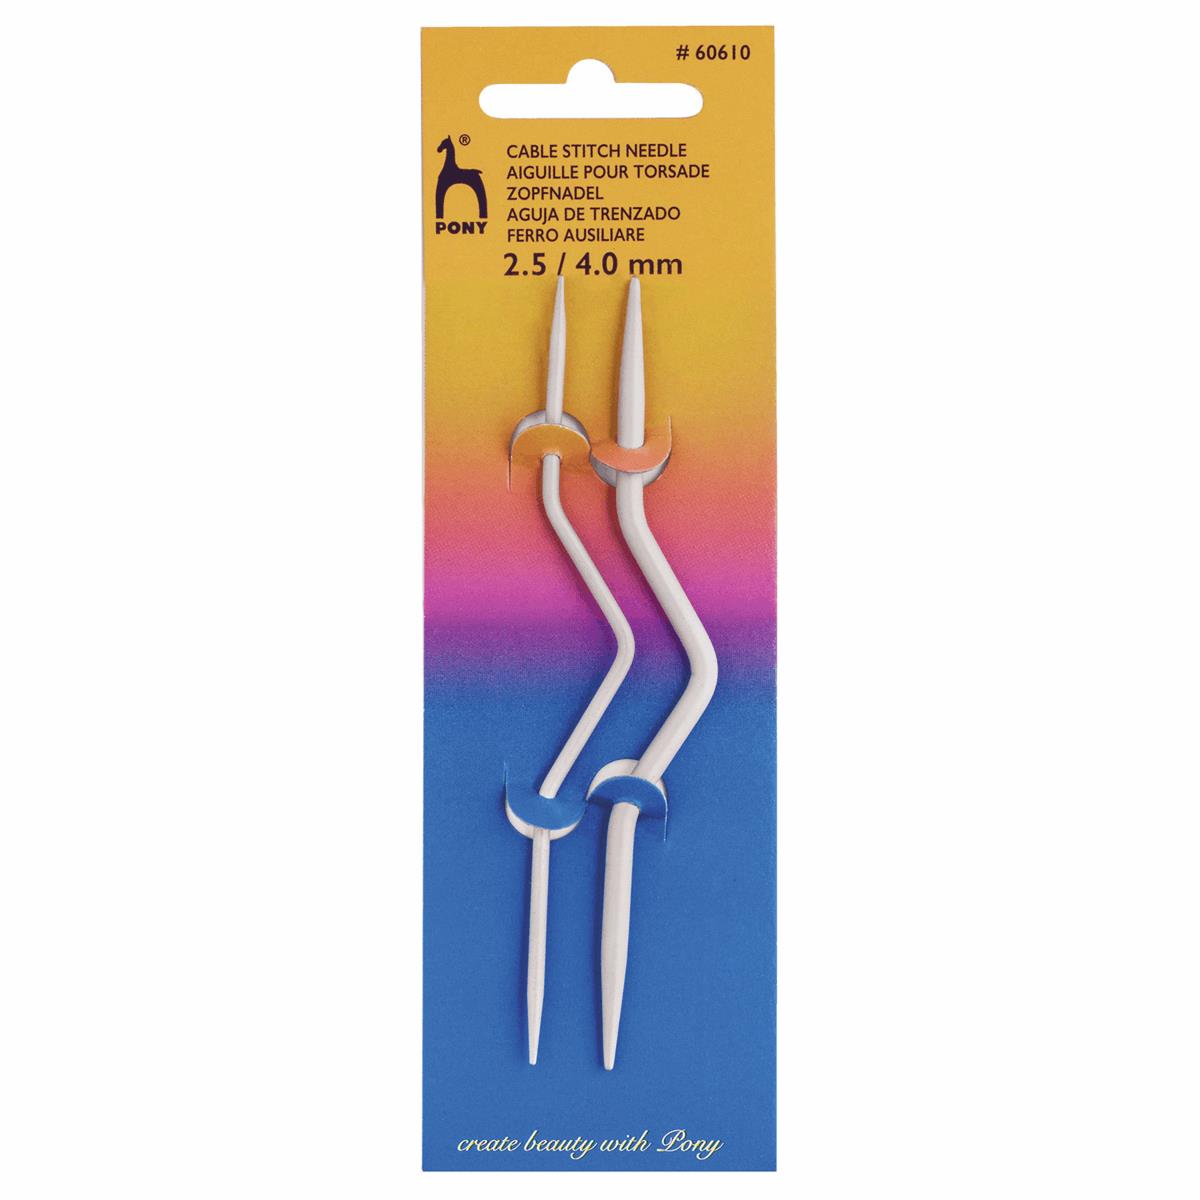 Clover Knitting Cable Needles Cranked Straight U Shape - All Sizes